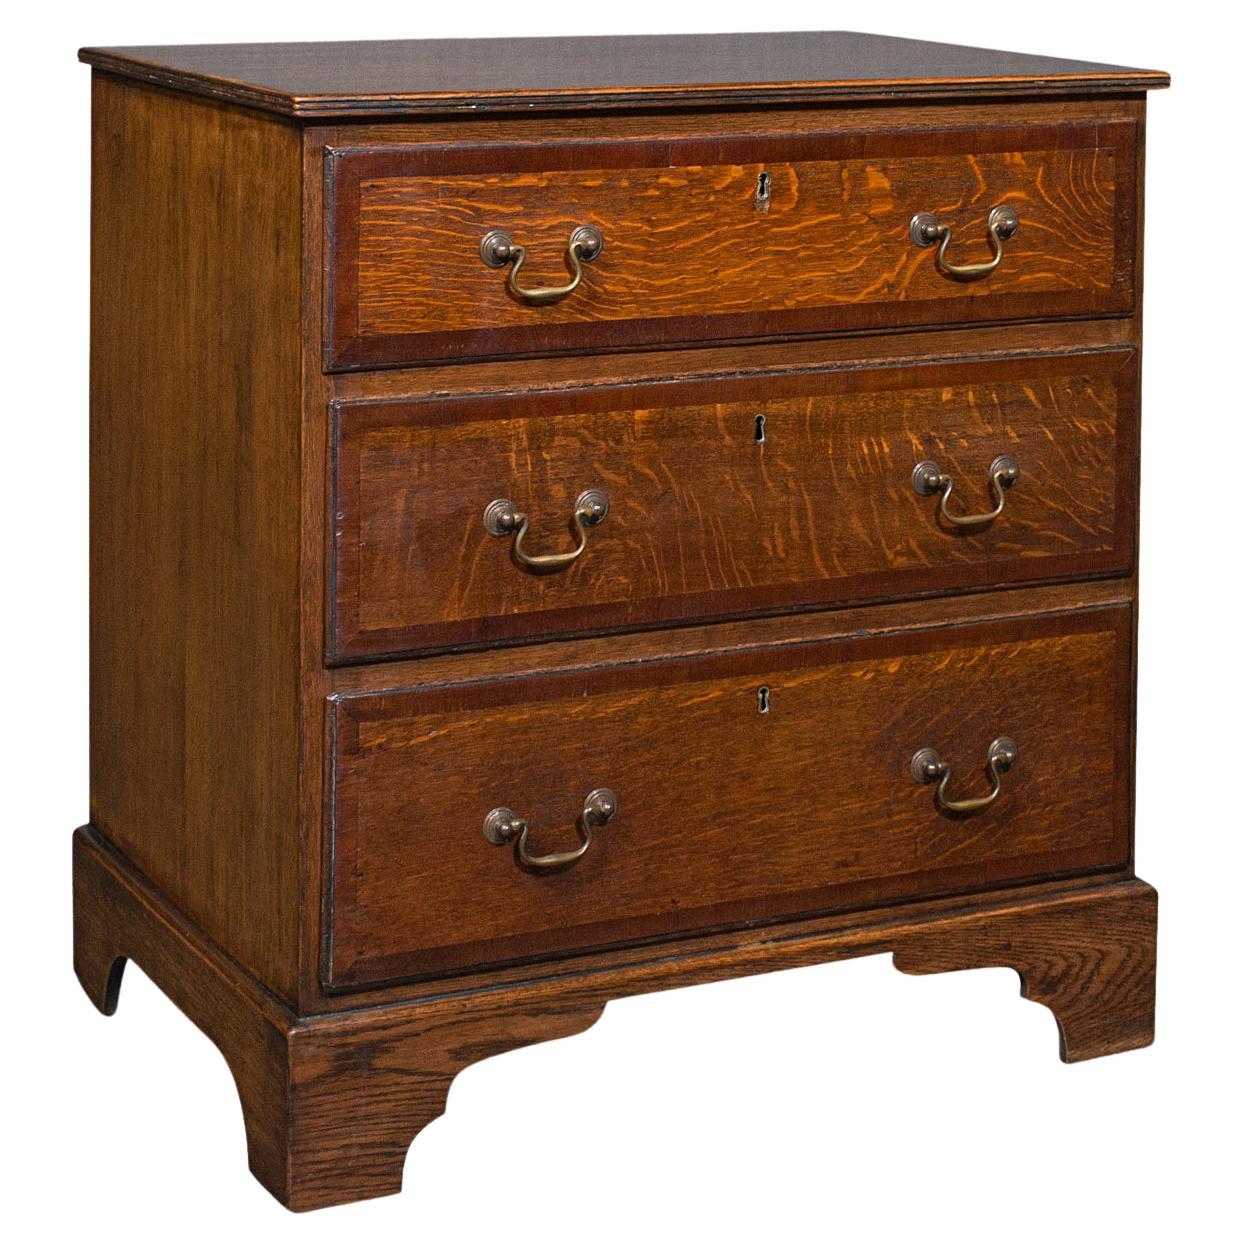 Antique Compact Chest of Drawers, English, Oak, Bedside Cabinet, Georgian, 1800 For Sale